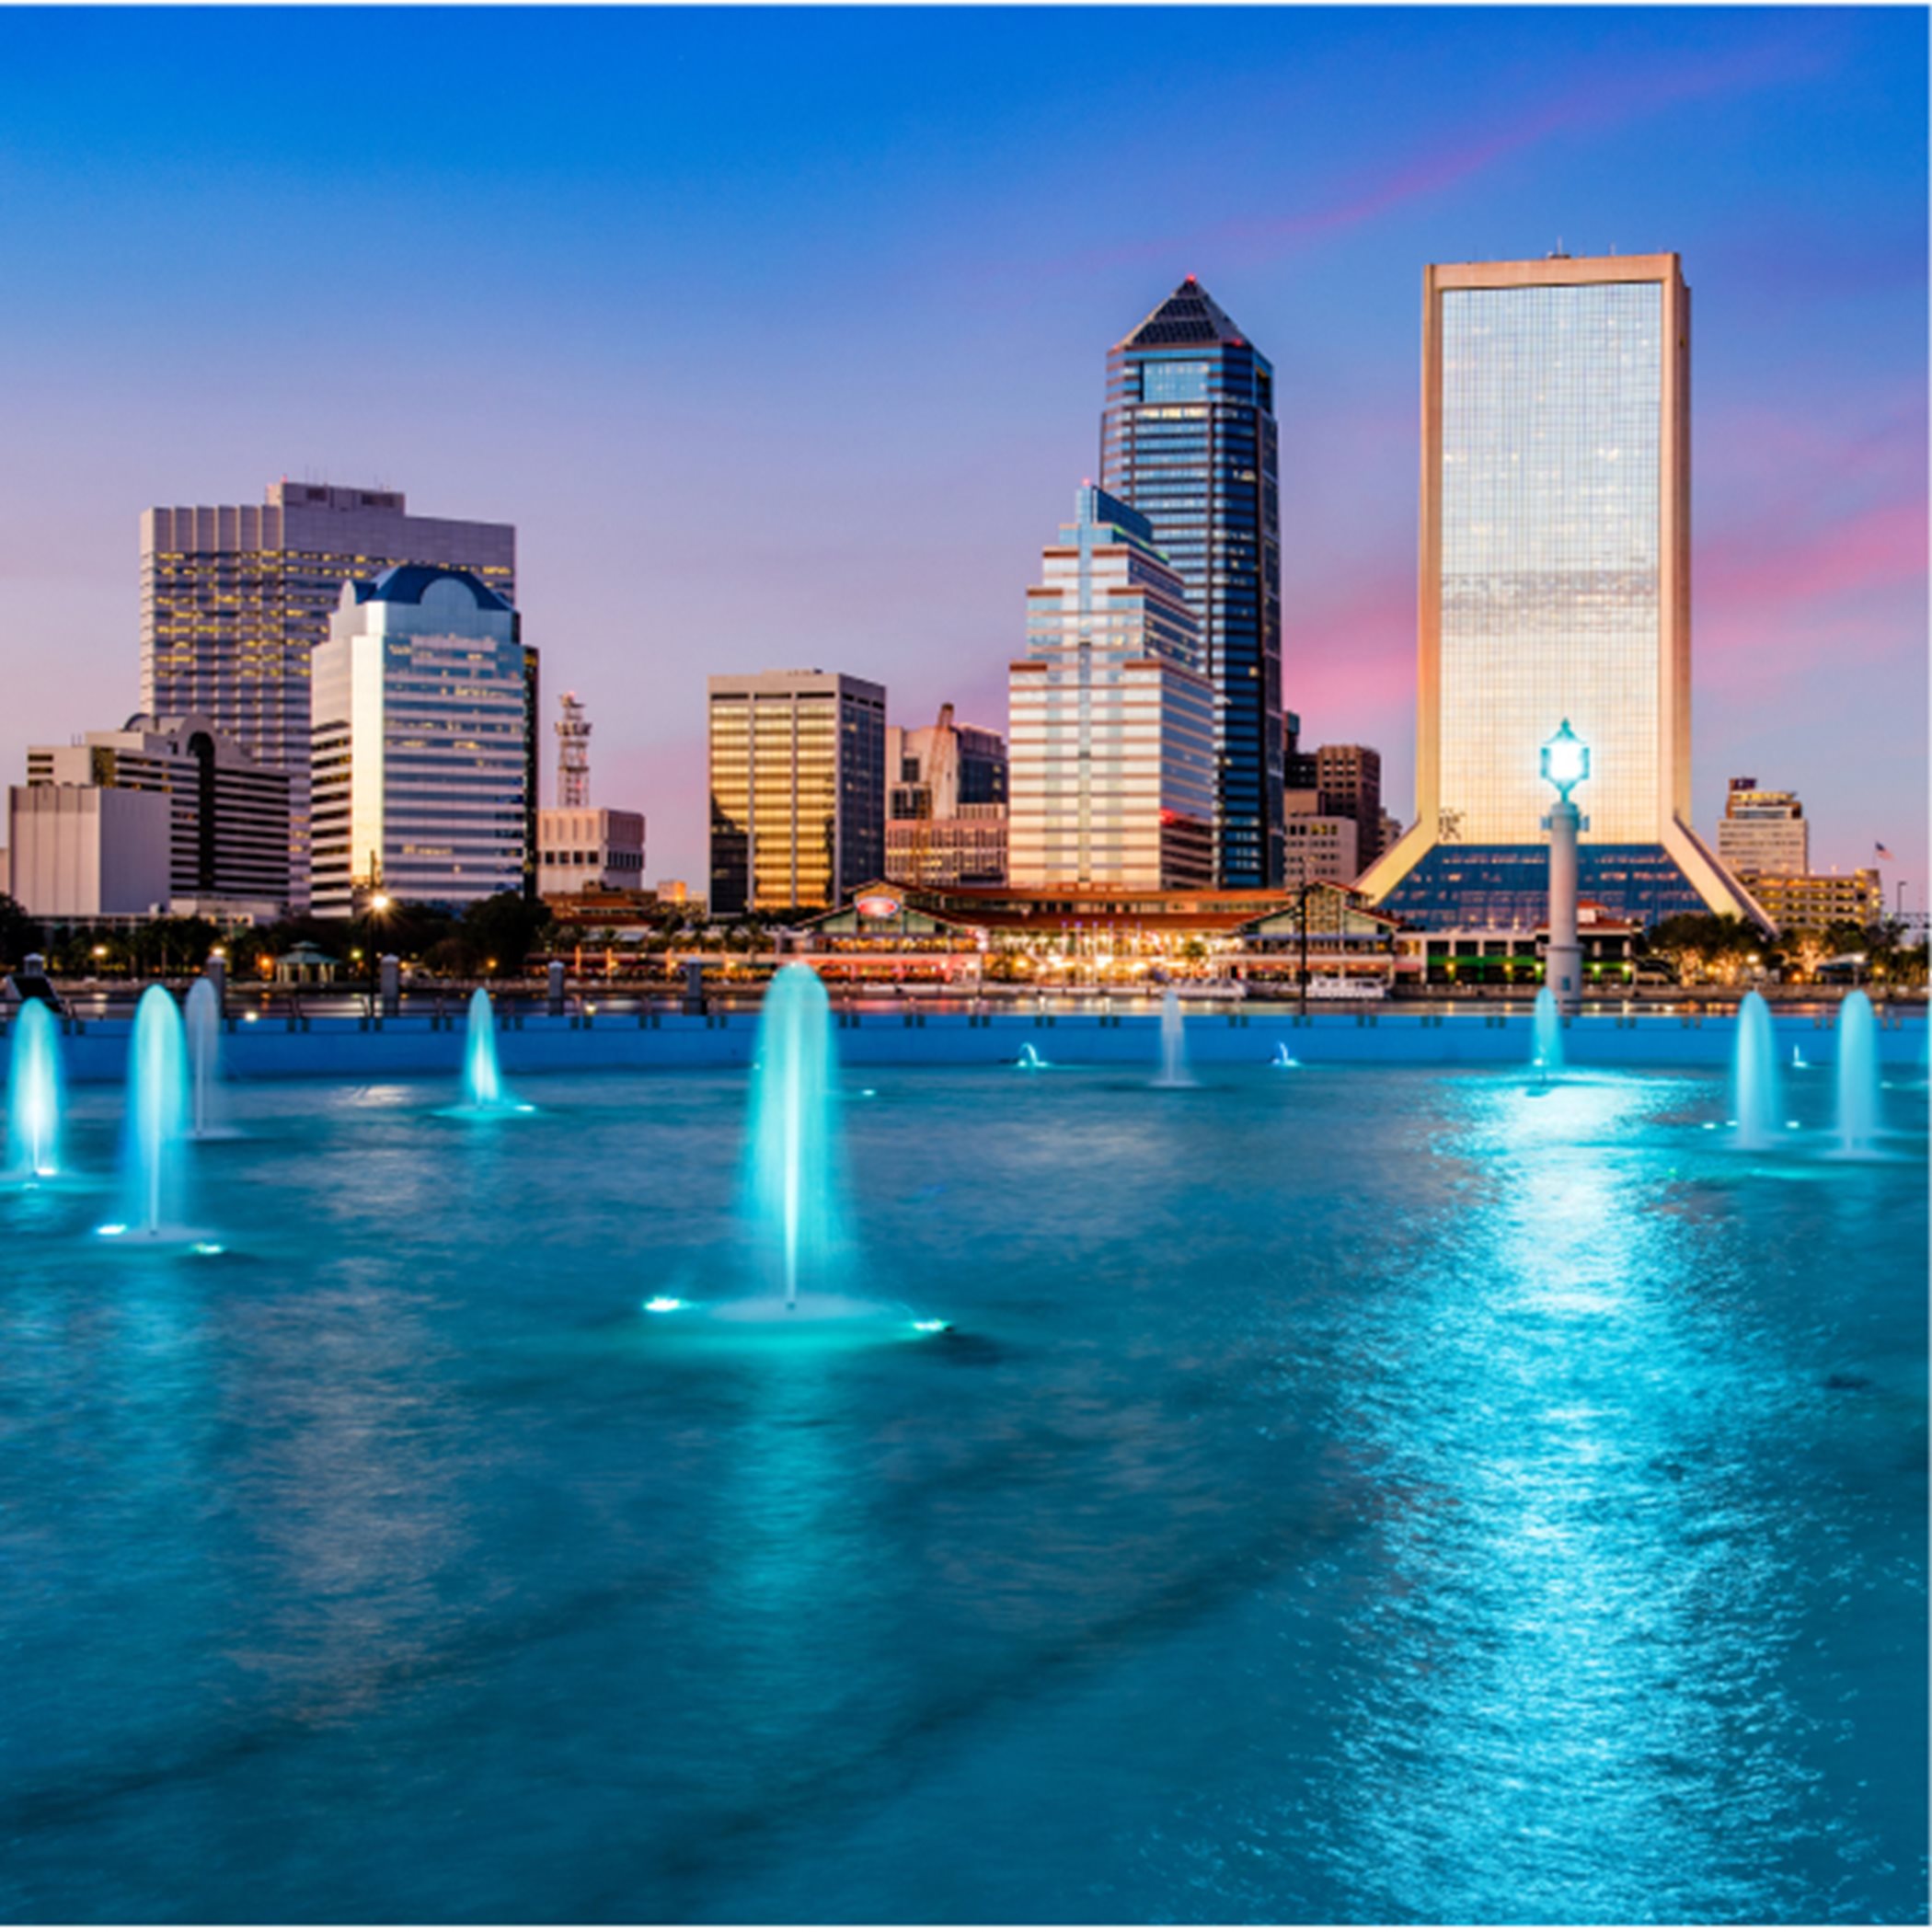 Skyline of Jacksonville Florida in front of Friendship Fountain